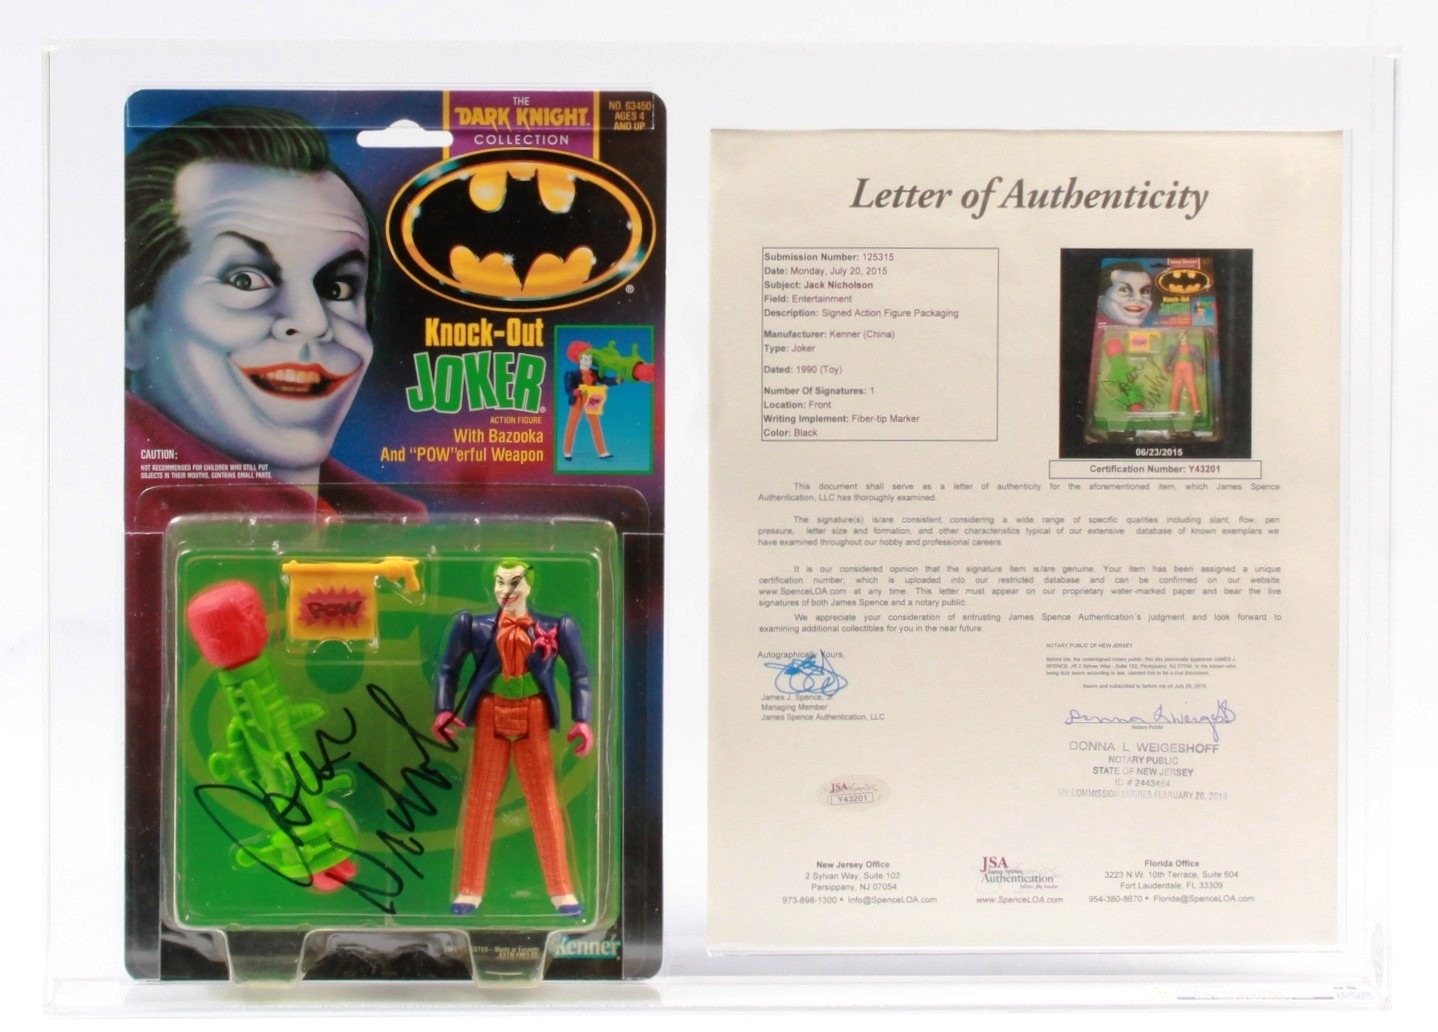 CUSTOM 1991 Kenner Batman Dark Knight Collection Carded Action Figure -  Knock-Out Joker (Signed by Jack Nicholson) with JSA COA